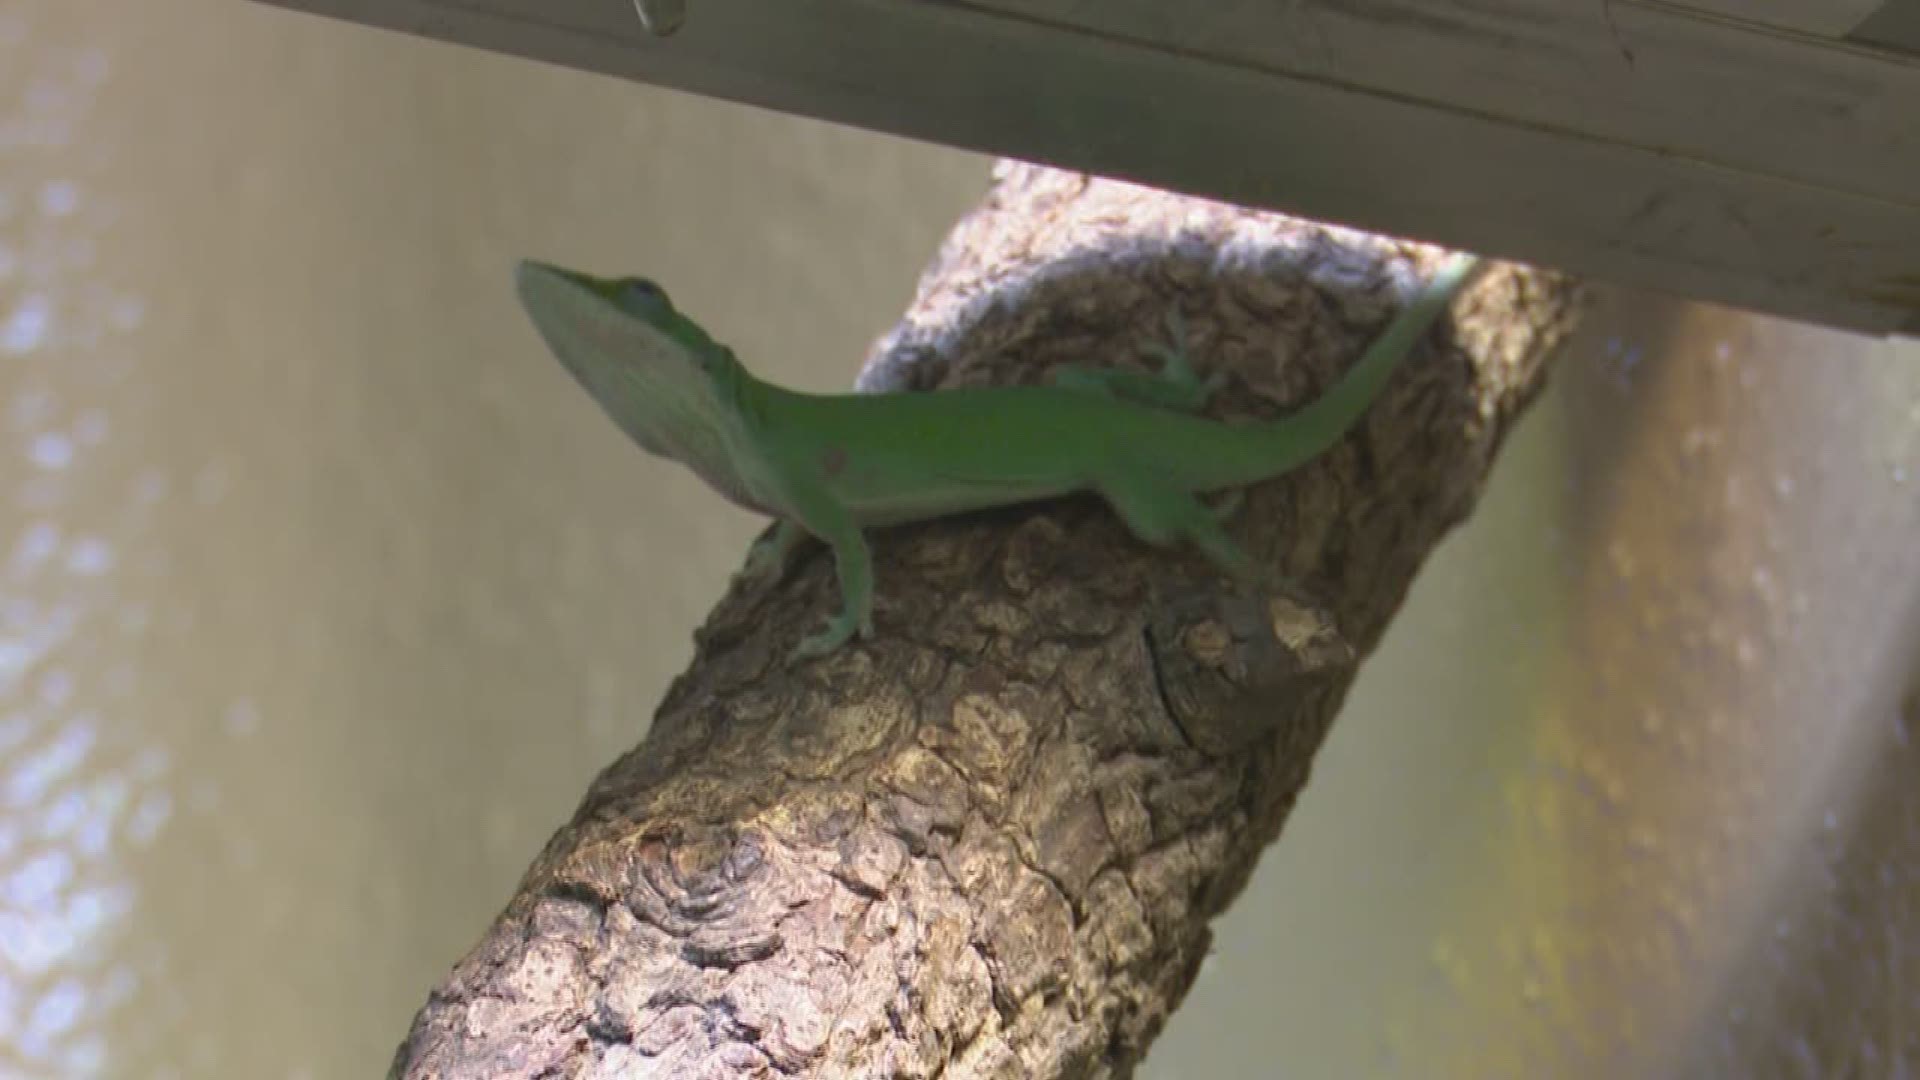 KHOU 11 checked in with Dr. Michele Johnson, an associate professor of biology at Trinity University, who's studied anoles for 15 years.